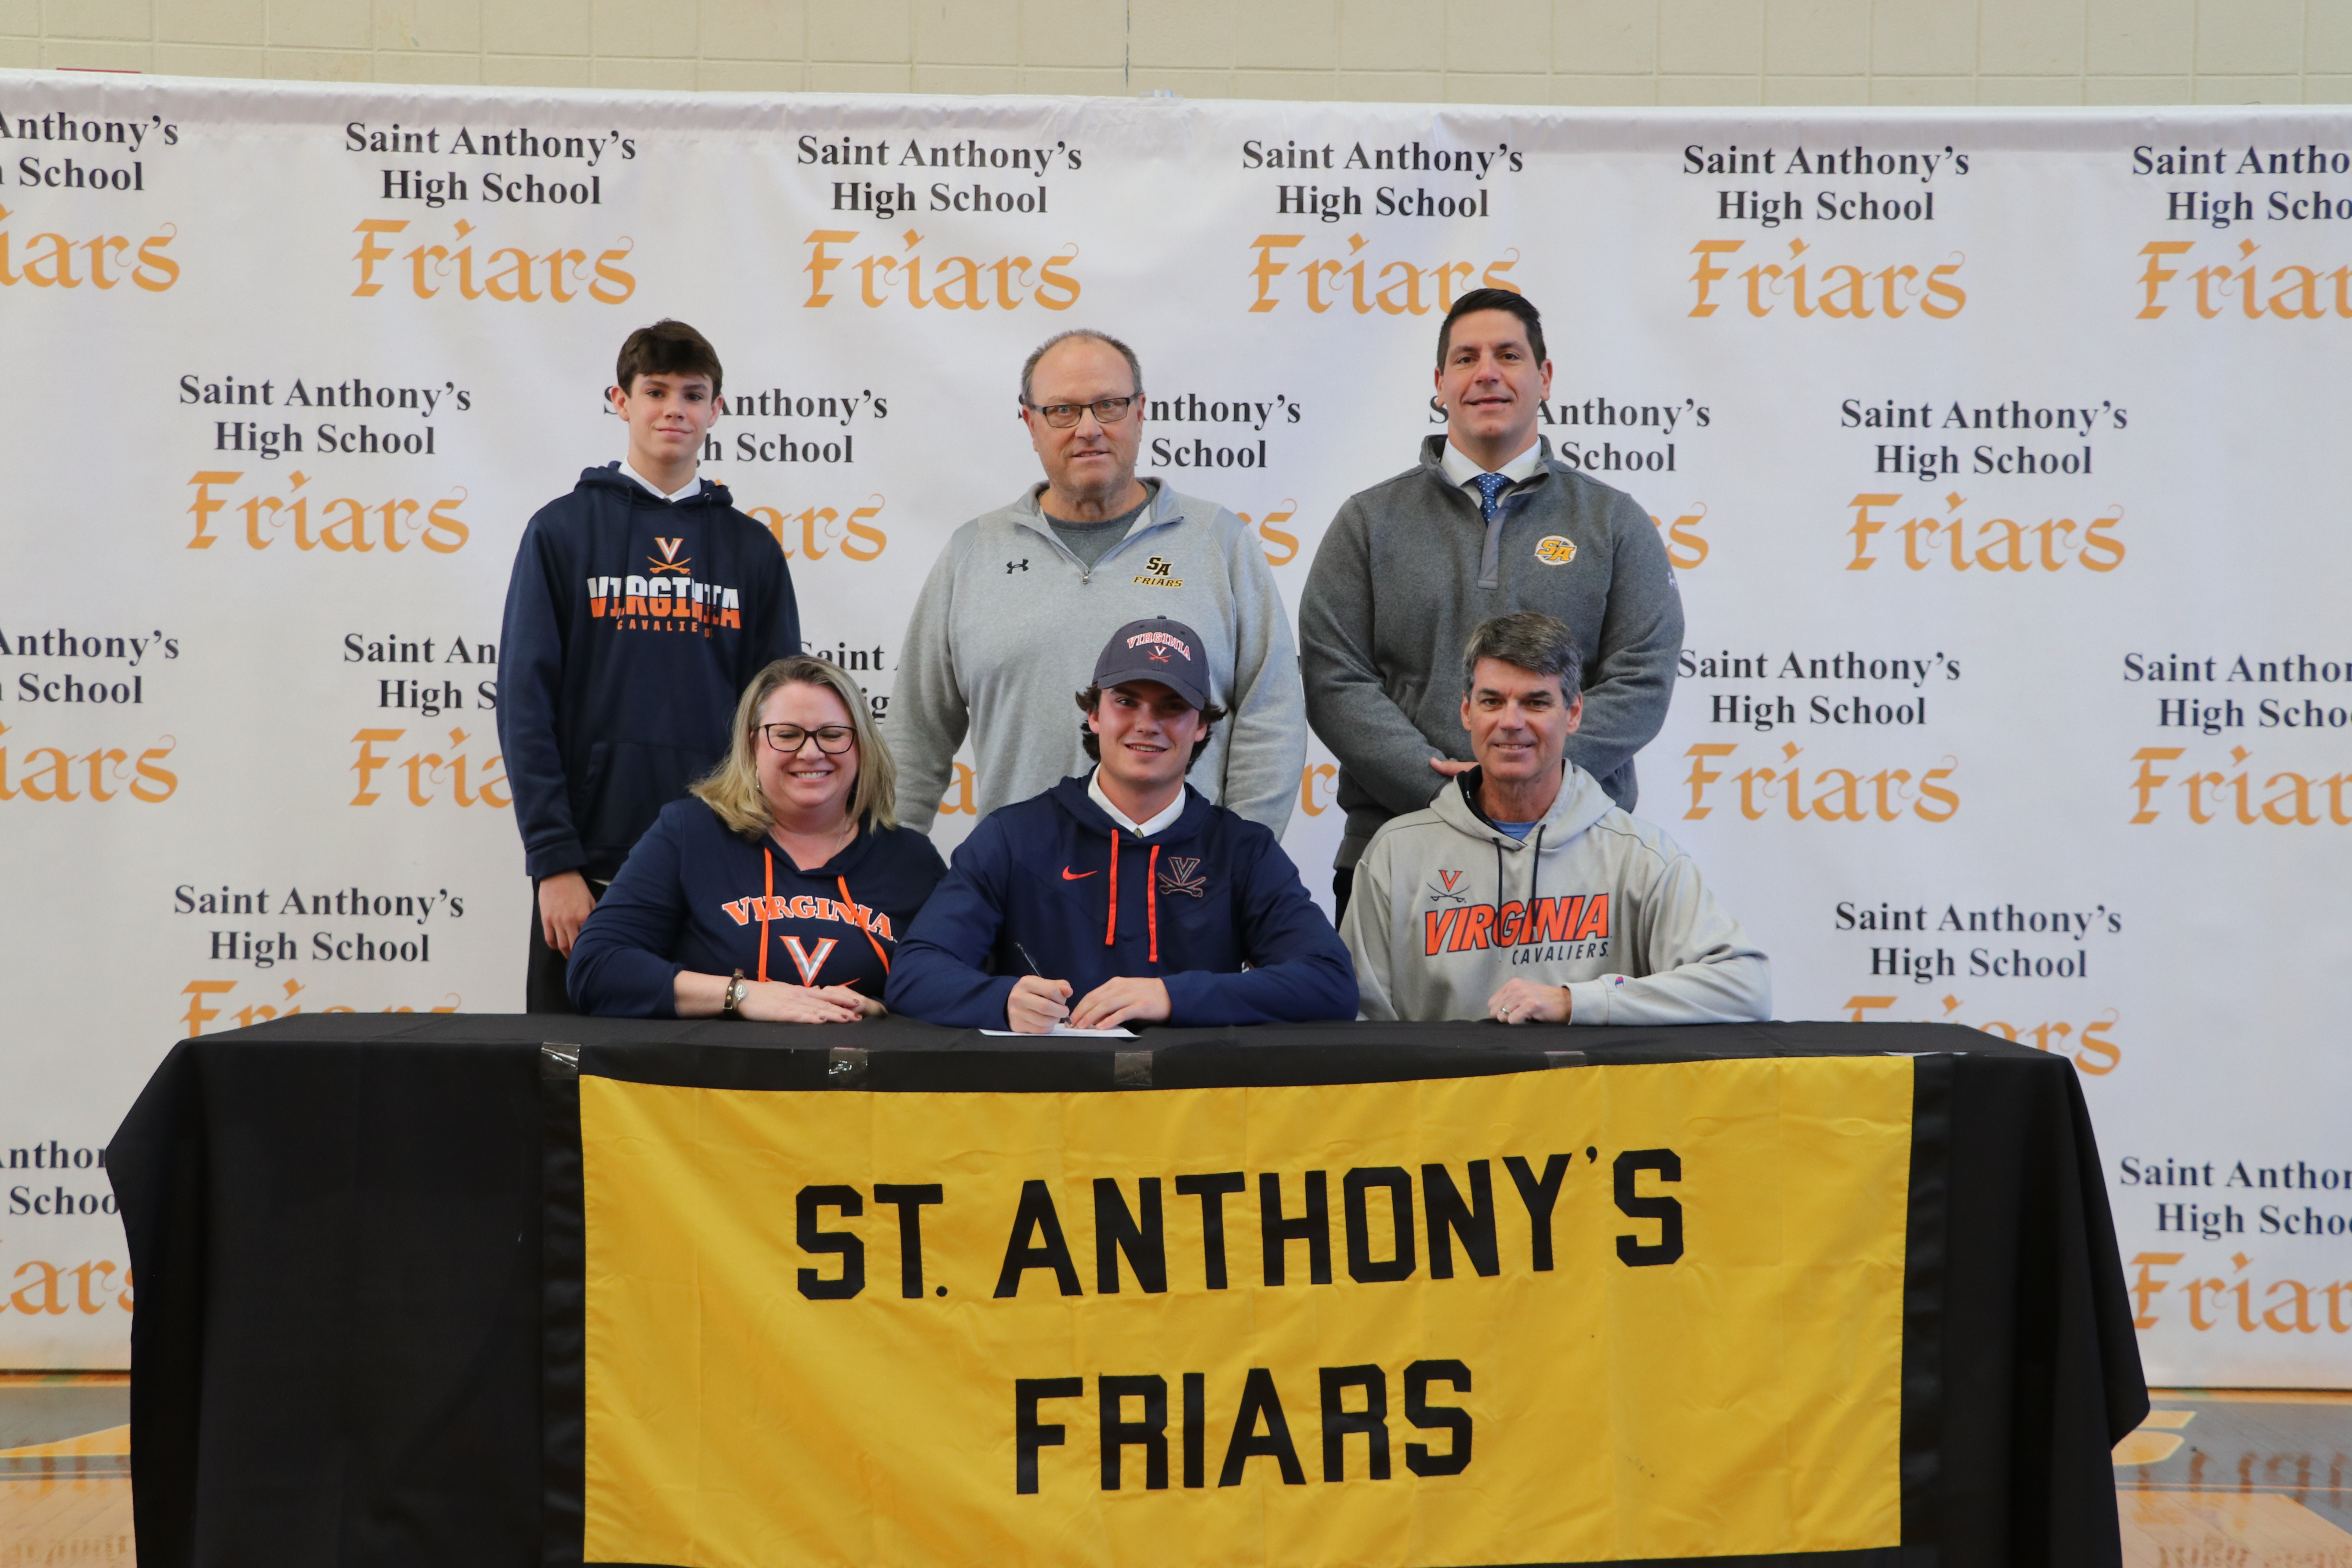 Thomas Snyder committed to the University of Virginia- CONGRATULATIONS